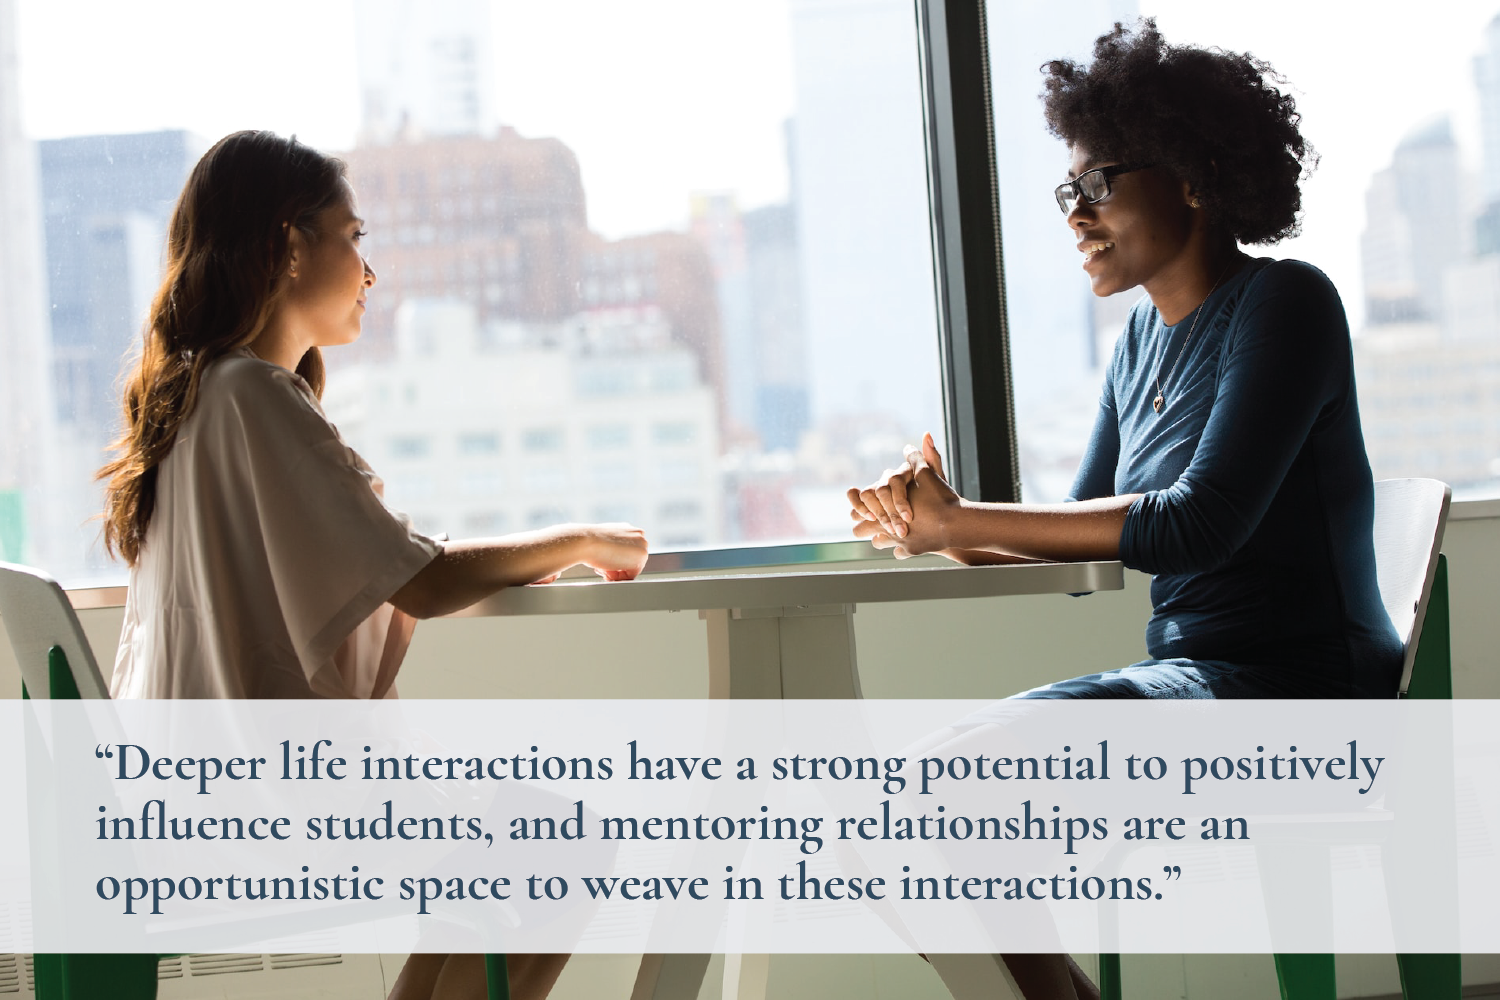 Two women sit together at a table, deep in conversation. Text overlay reads, “Deeper life interactions have a strong potential to positively influence students, and mentoring relationships are an opportunistic space to weave in these interactions.”